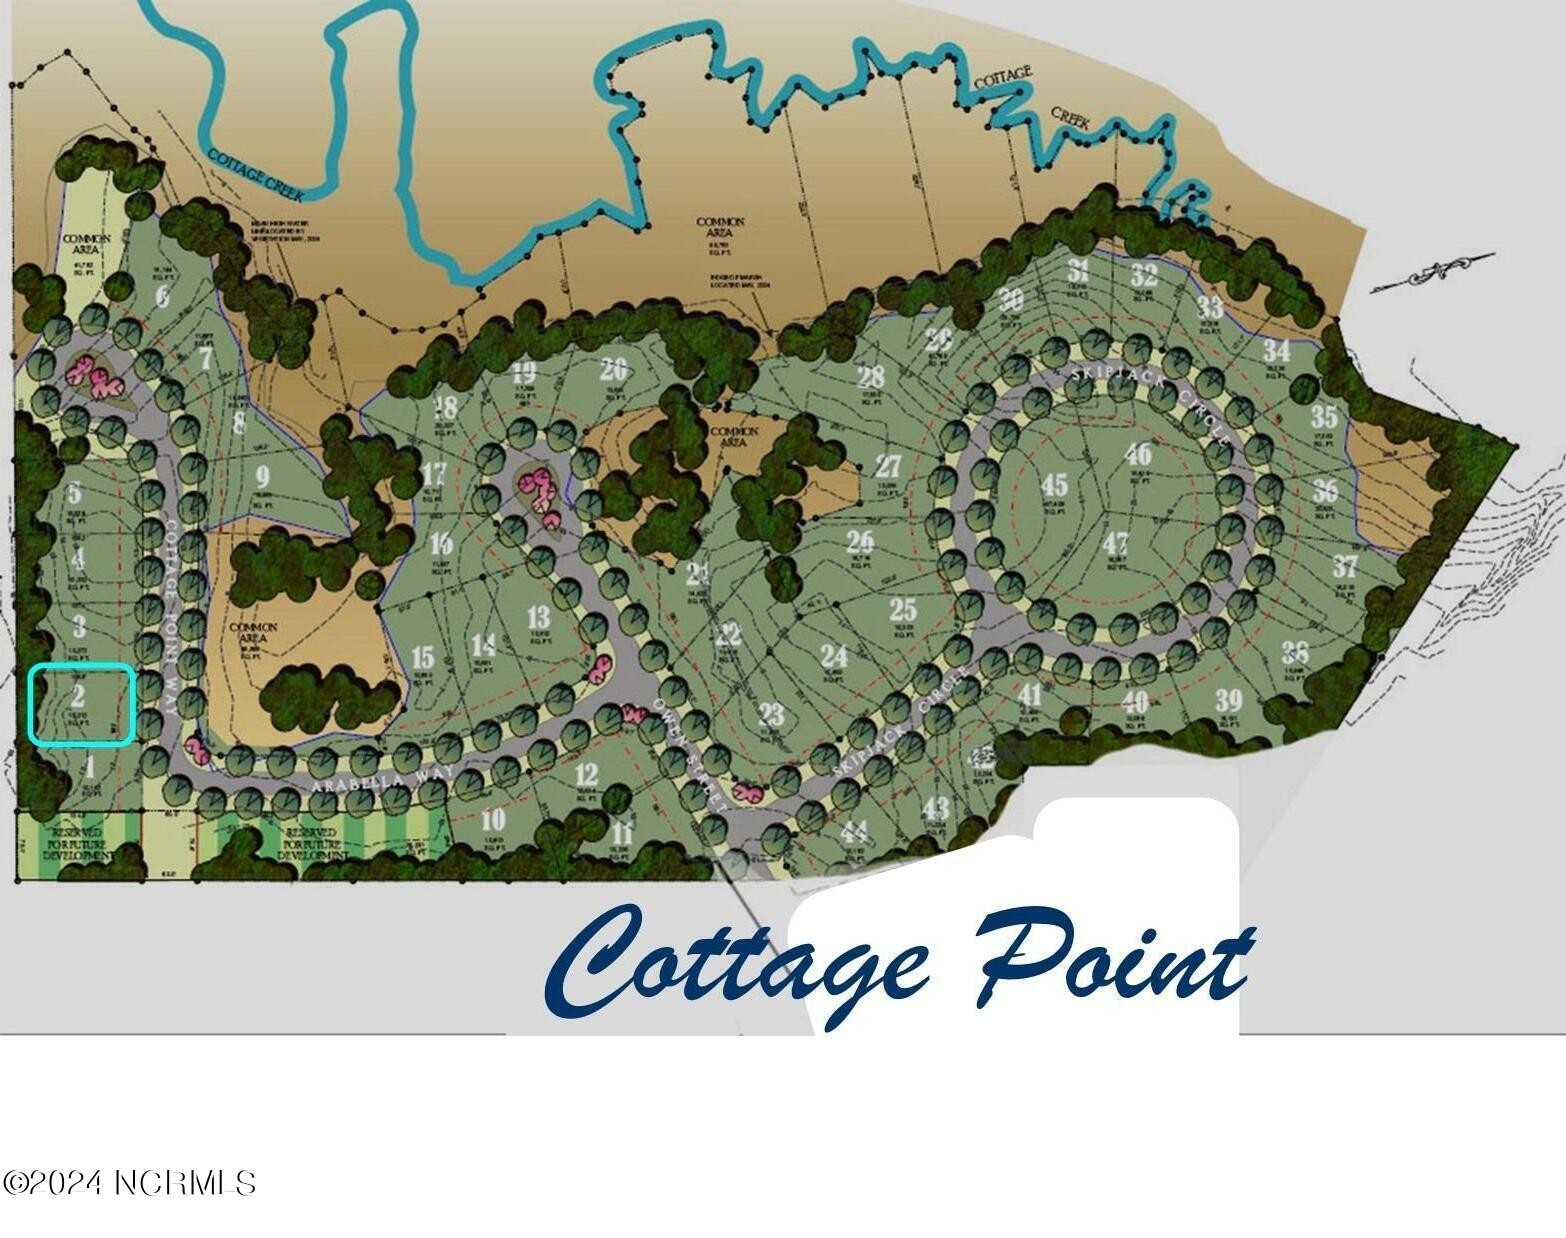 8. Lot 2 Cottage Point Way